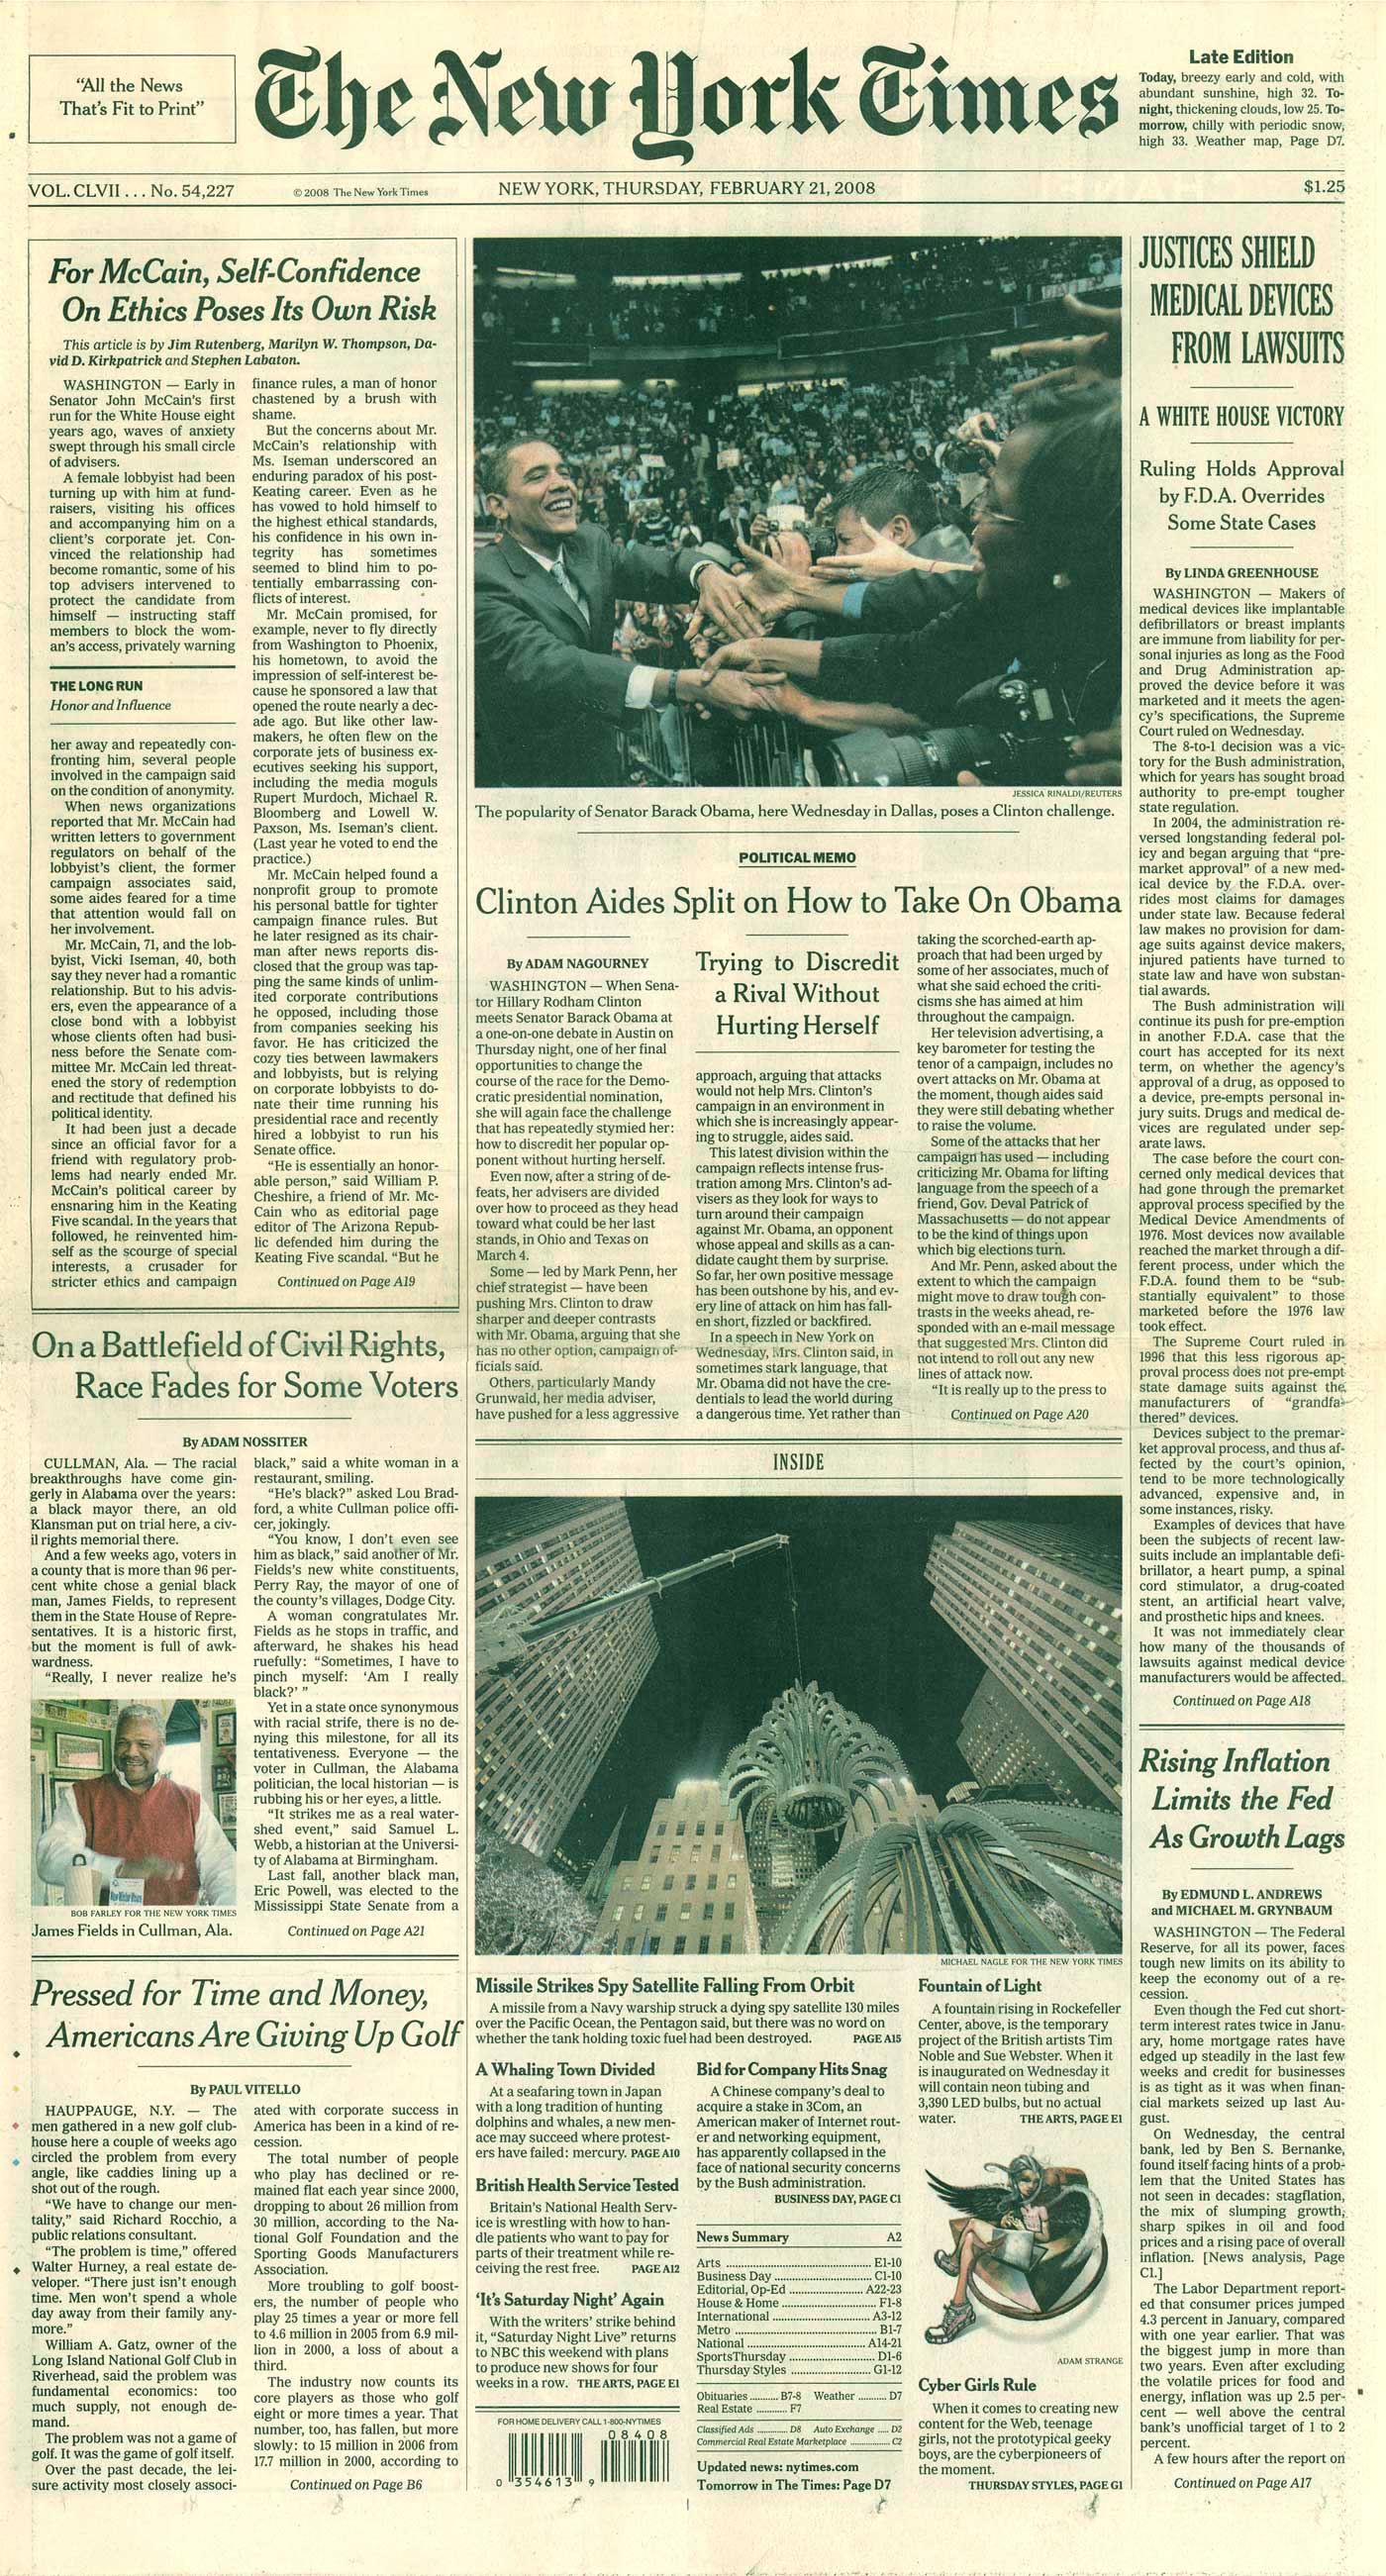 New York Times, 2008 cover